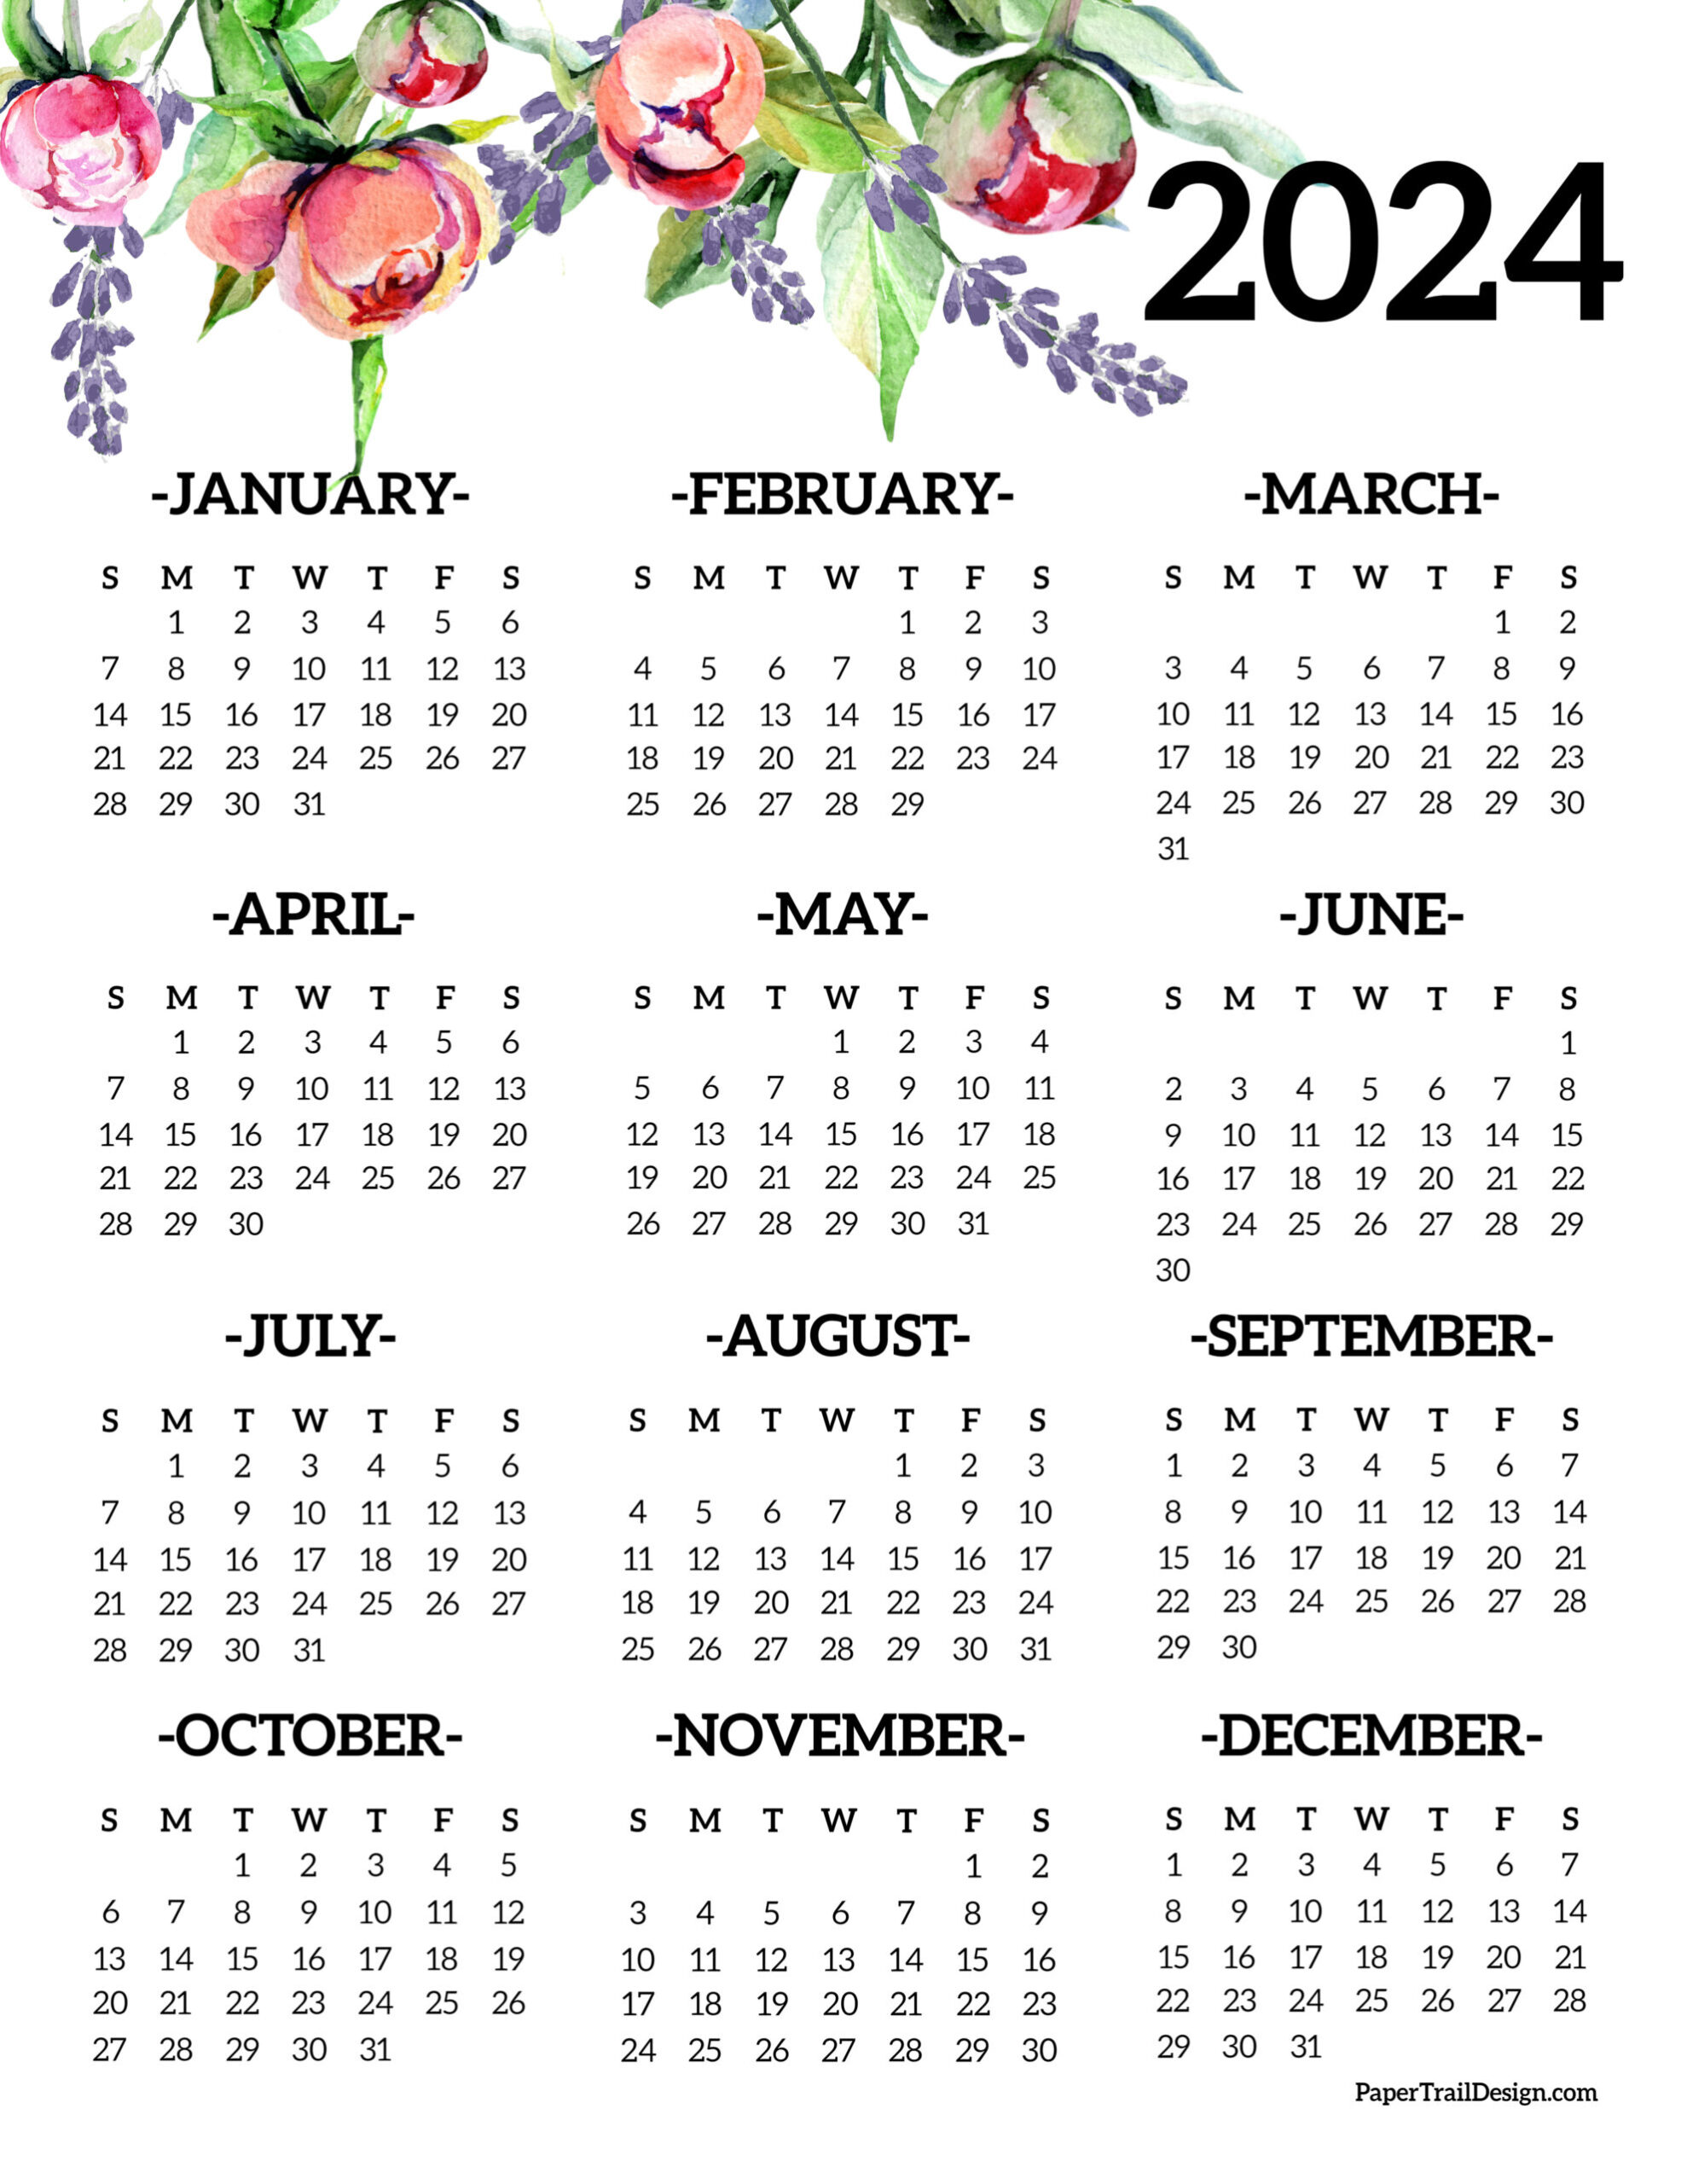 Calendar 2024 Printable One Page - Paper Trail Design | 2024 Yearly Calendar At A Glance